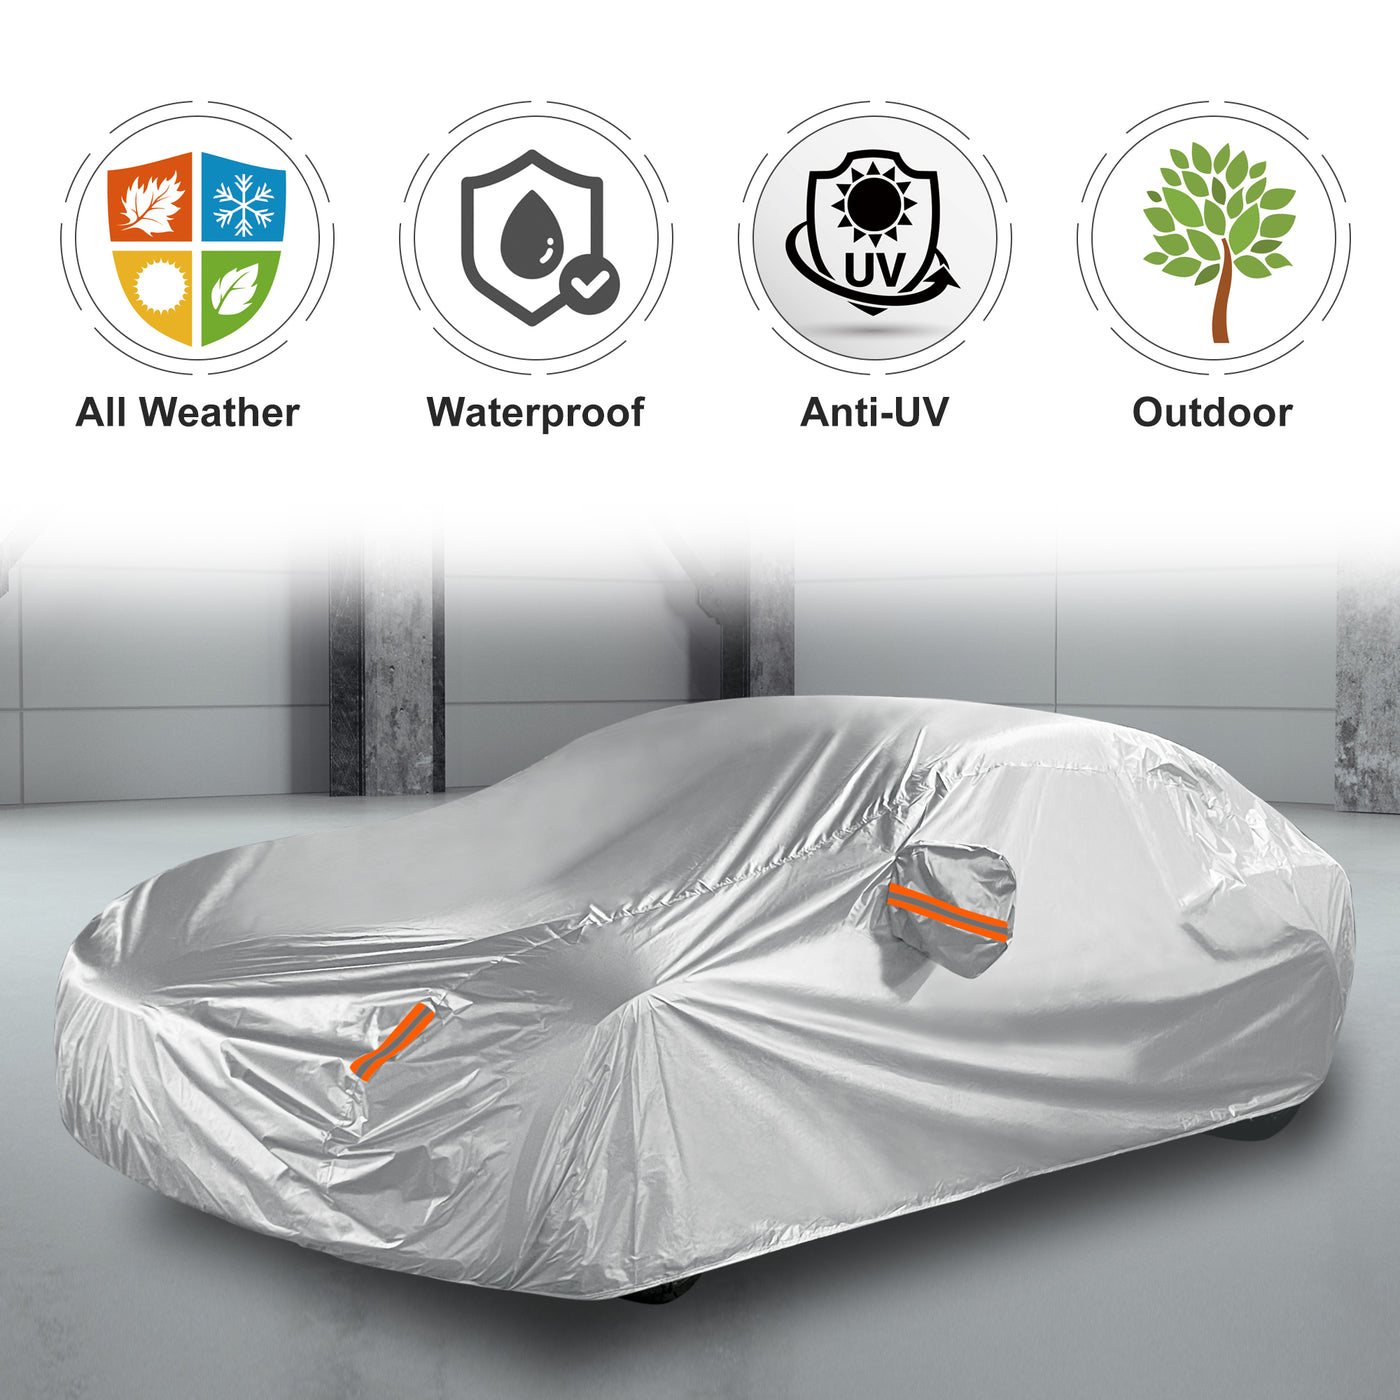 X AUTOHAUX Car Cover Full Car Custom Fit for Tesla 3 Model 3 2017-2023 Waterproof Dustproof Windproof Snow Sun Heat Protection Outdoor All Weather Accessories 190T